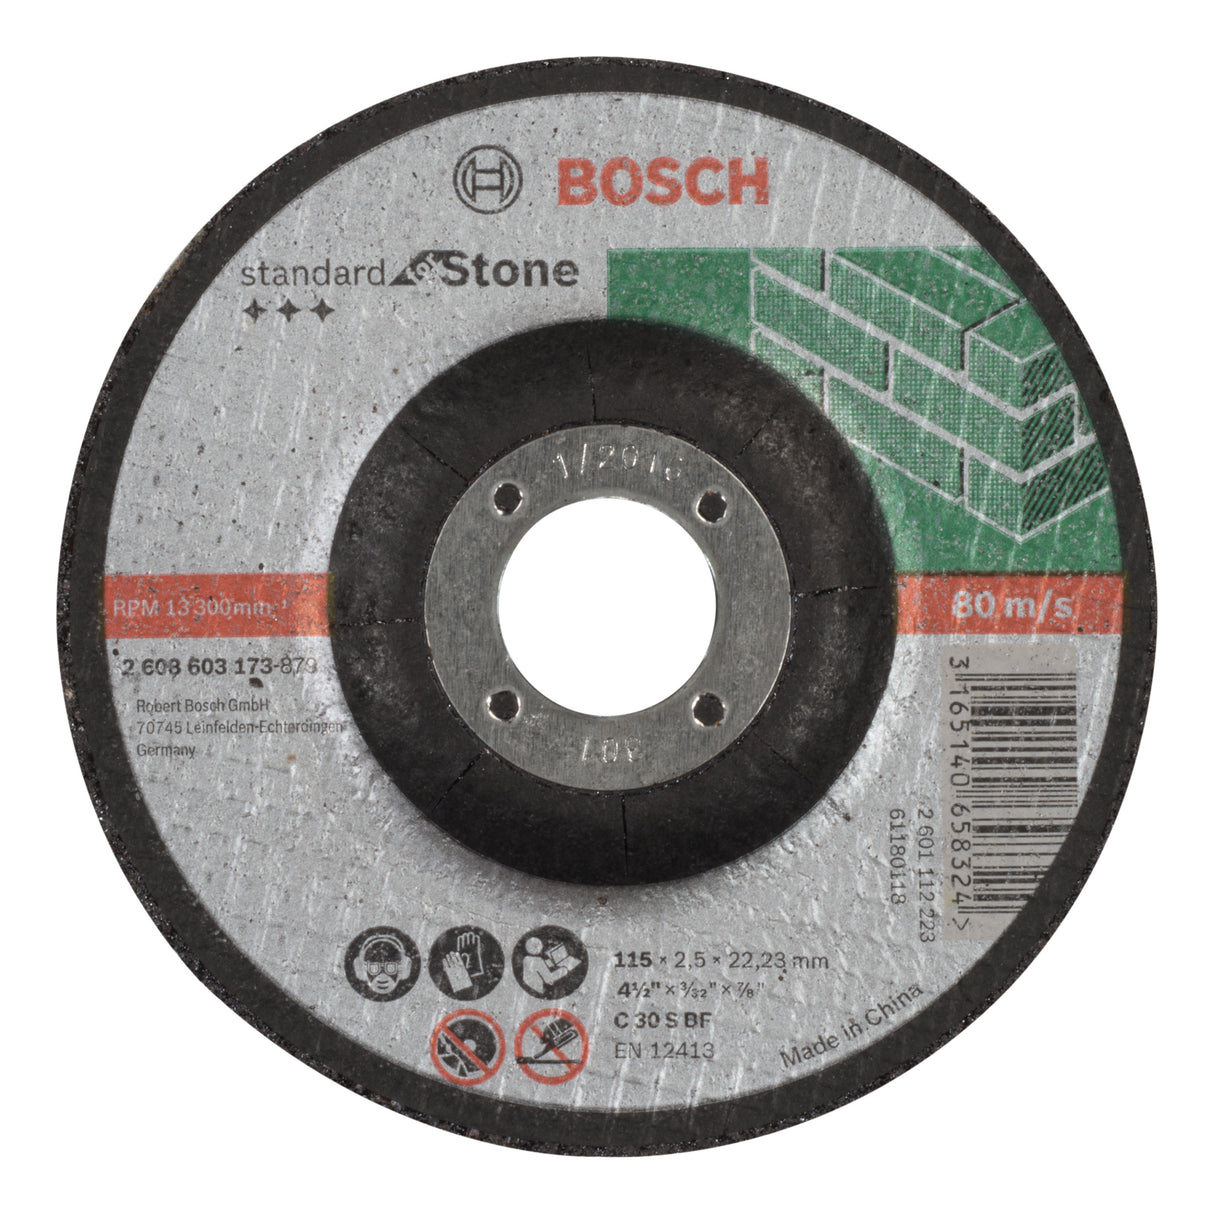 Bosch Professional Stone Cutting Disc with Depressed Centre C 30 S BF - 115mm x 22.23mm x 2.5mm